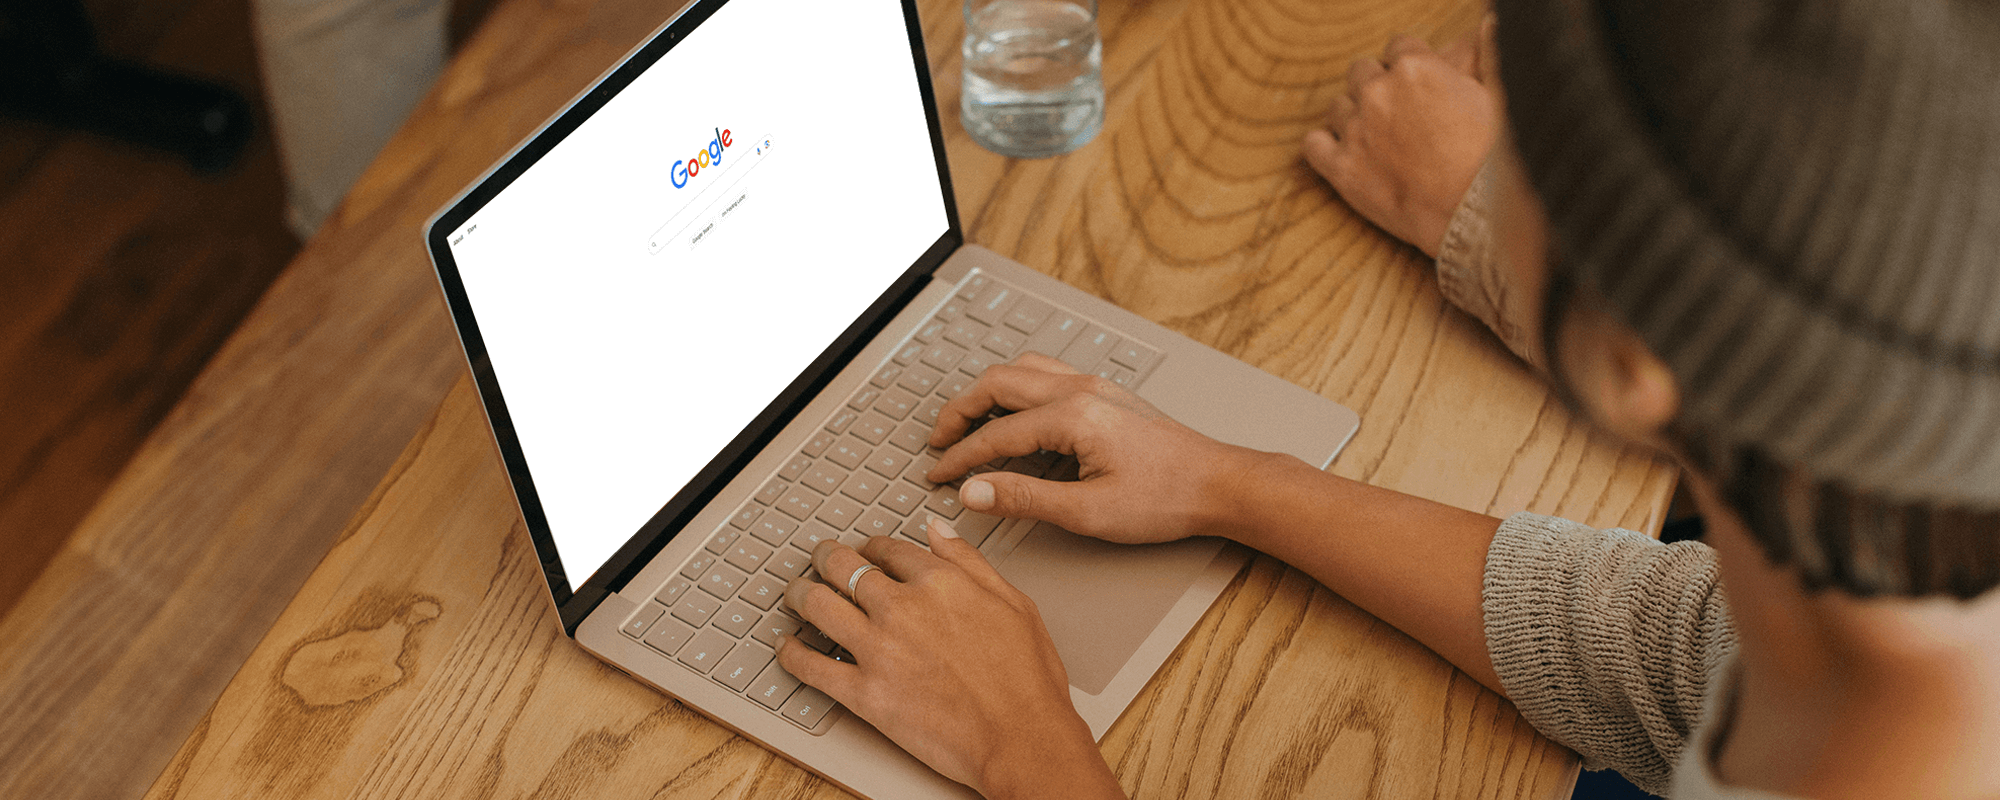 Using a laptop to search on Google